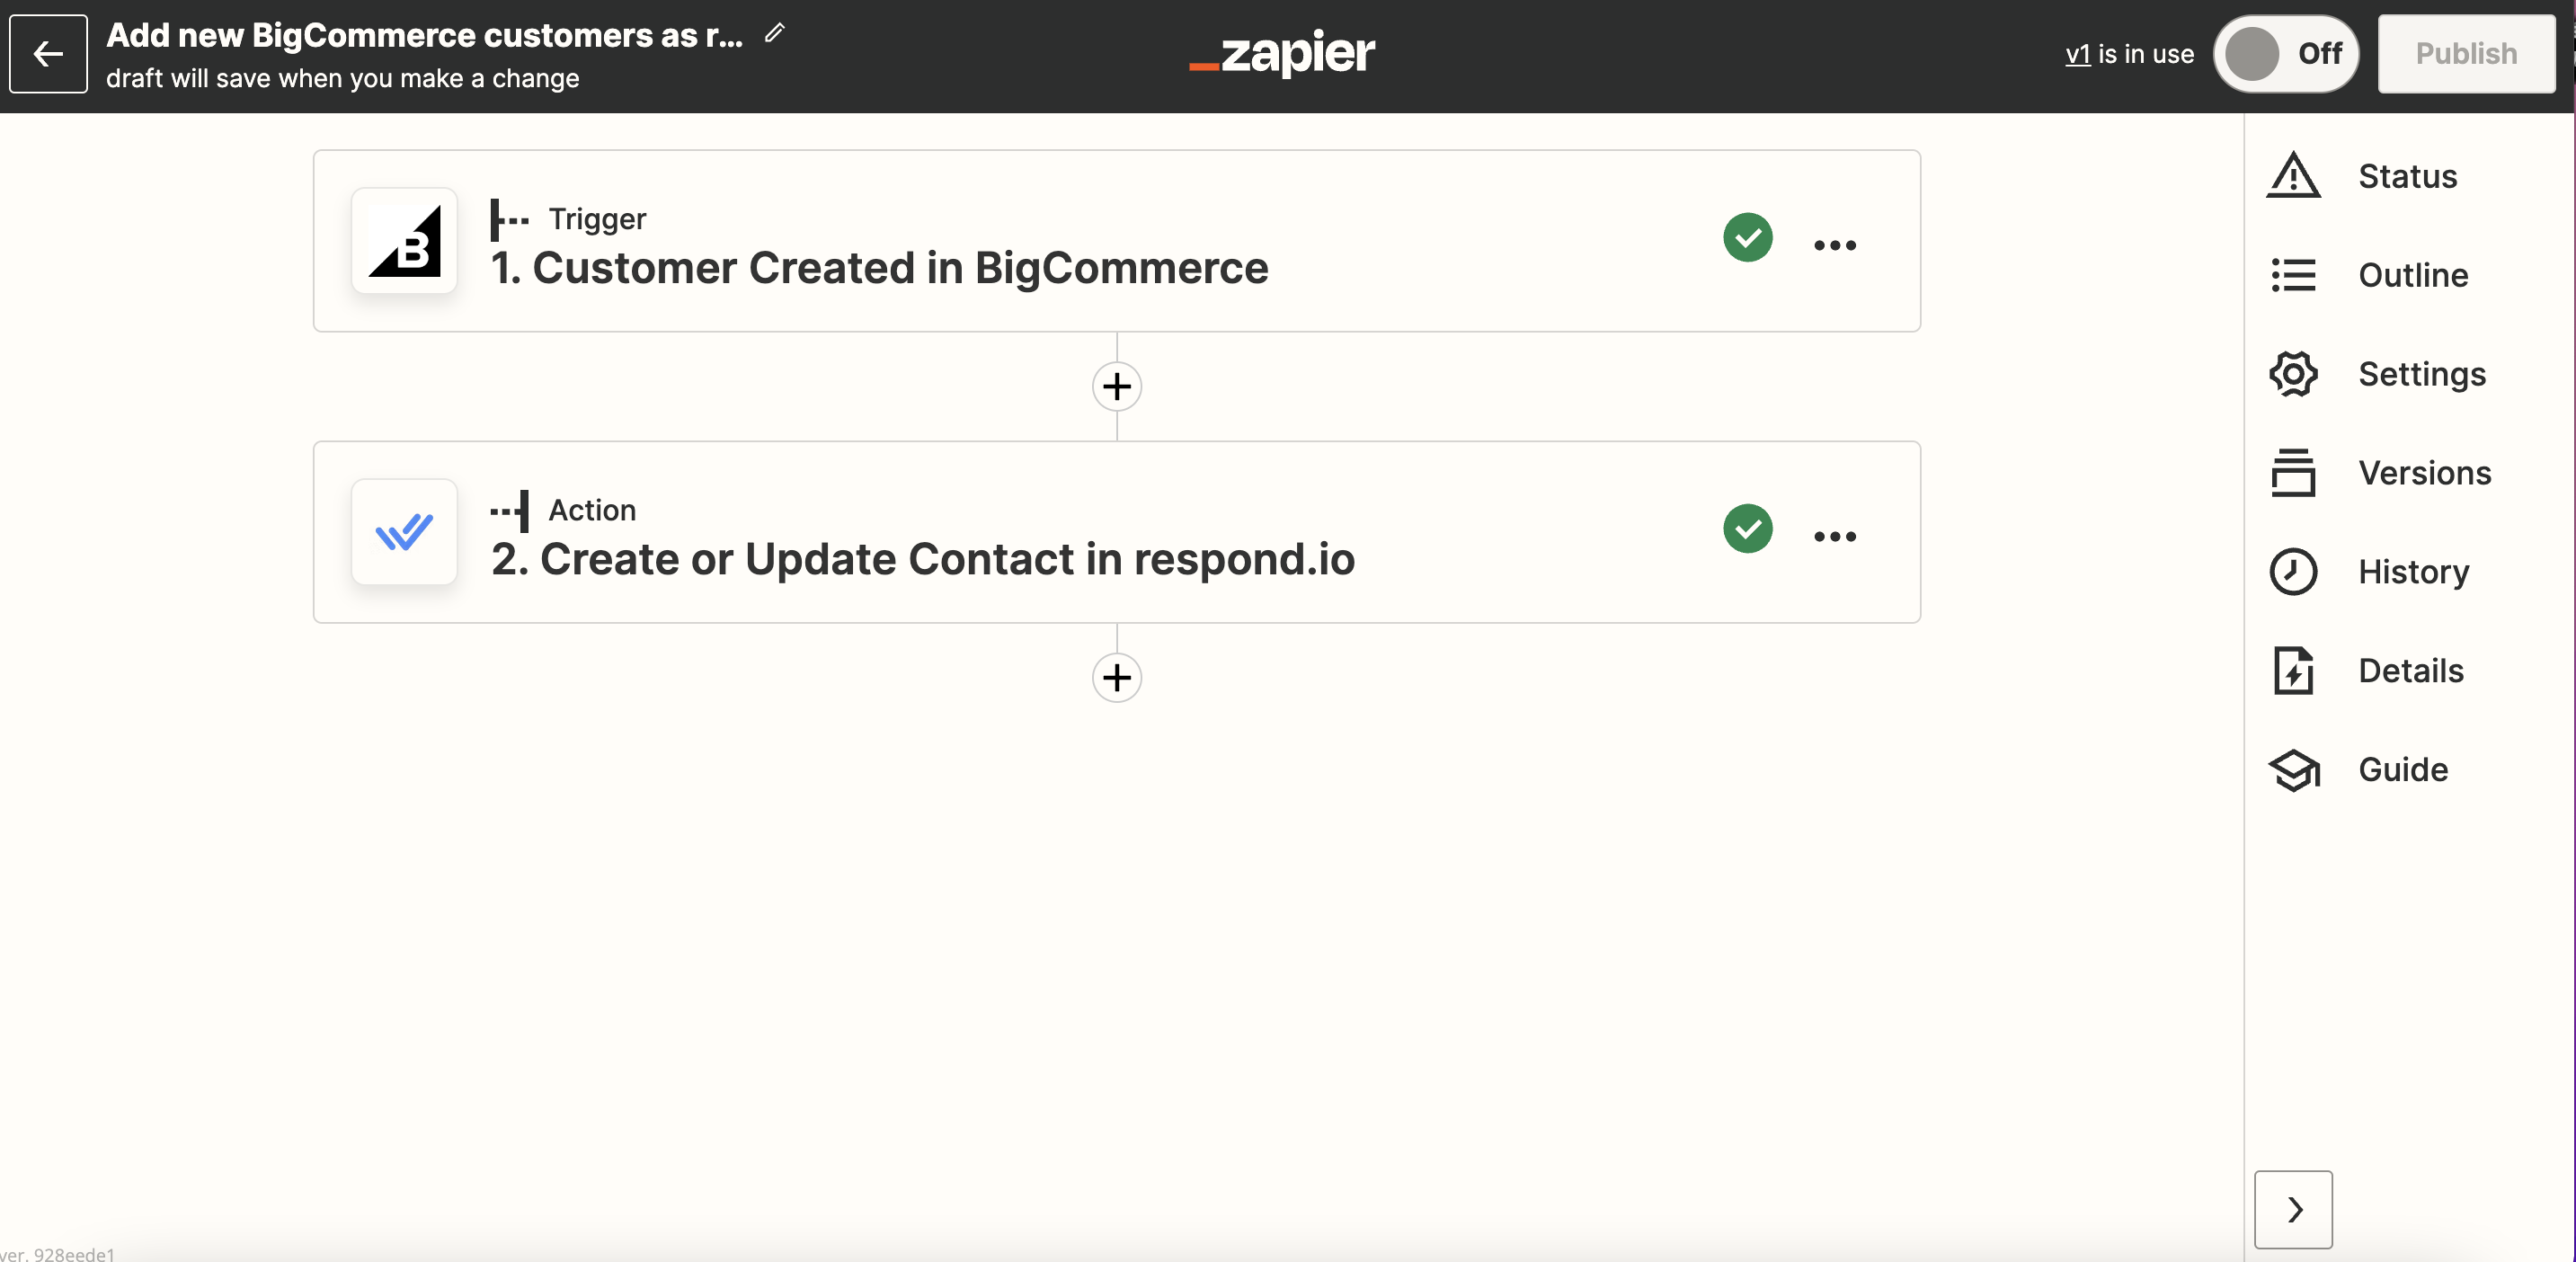 screenshot of Zapier template to add contacts as customers